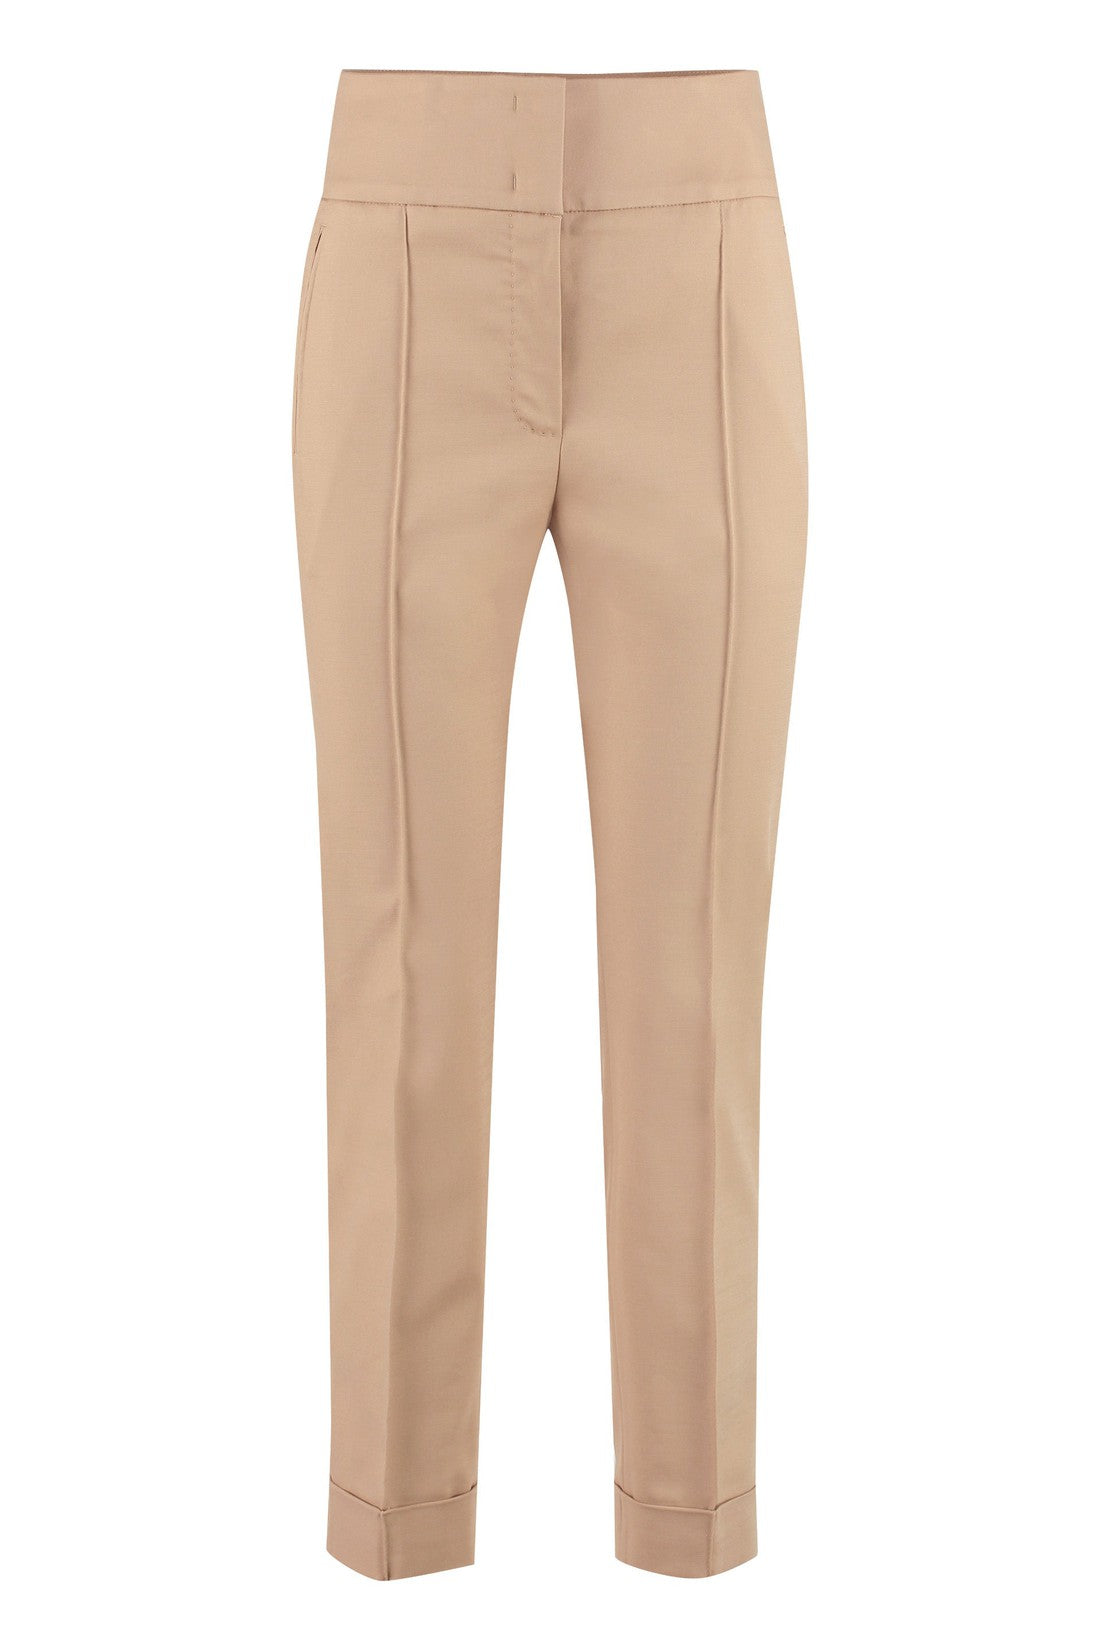 Peserico-OUTLET-SALE-High-rise cotton trousers-ARCHIVIST